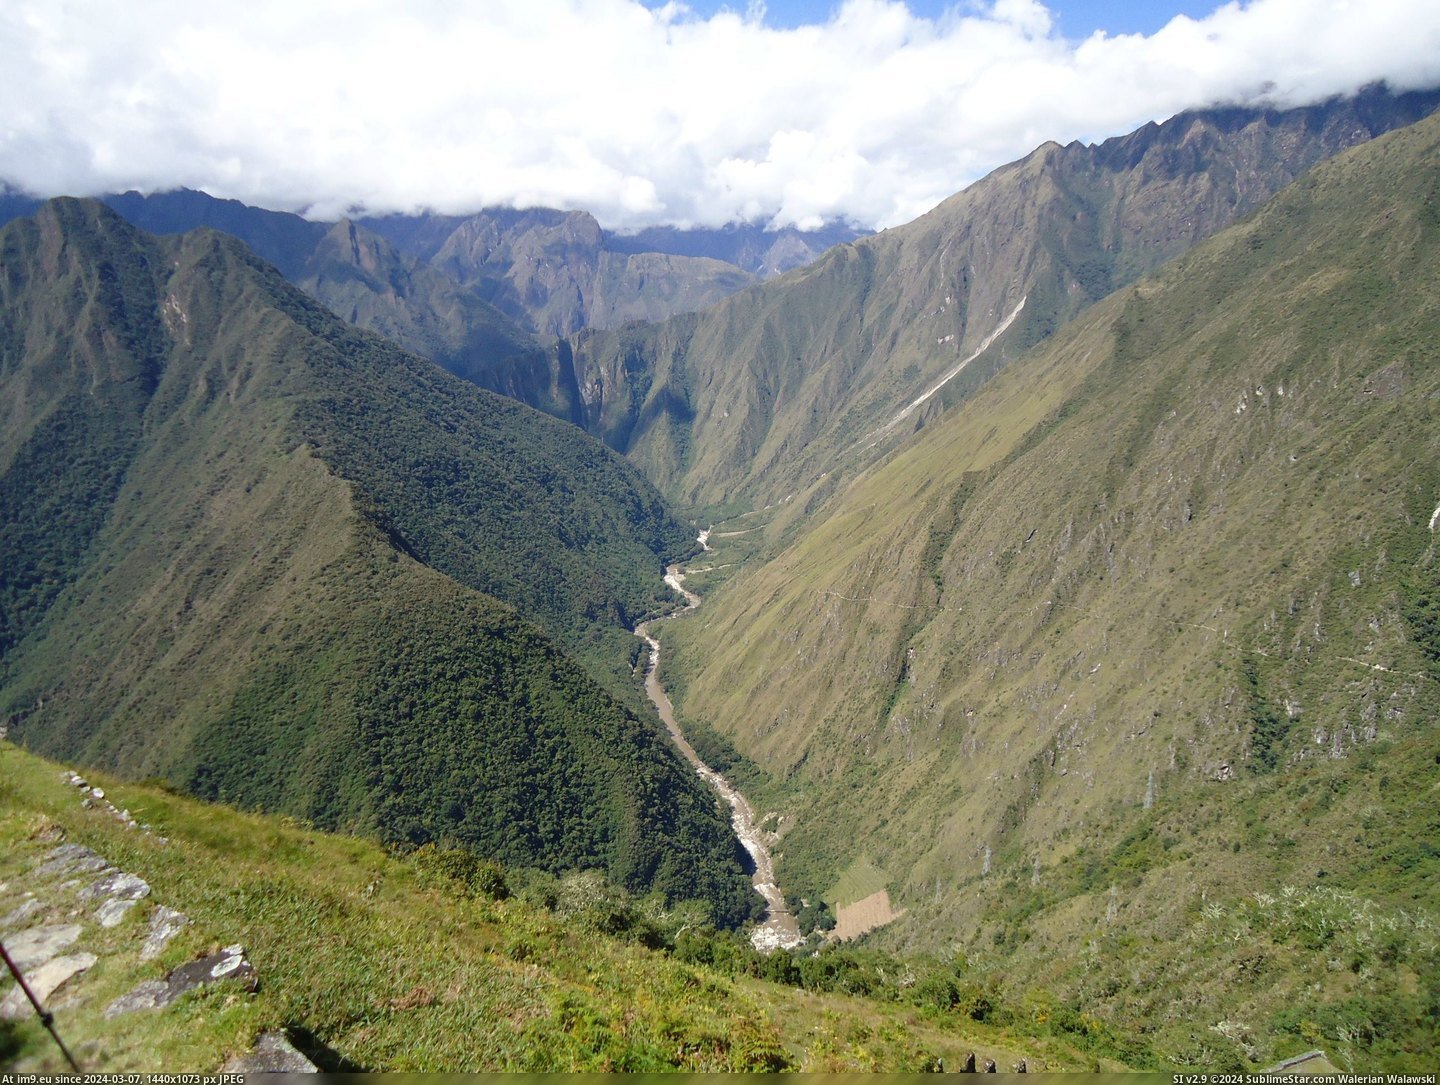 #Trail #Simply #2592x1944 #Picchu #Machu #Peru #Breathtaking #Hiked [Earthporn] I've also hiked the Inca Trail to Machu Picchu in Peru - the views are simply breathtaking [2592x1944] Pic. (Obraz z album My r/EARTHPORN favs))